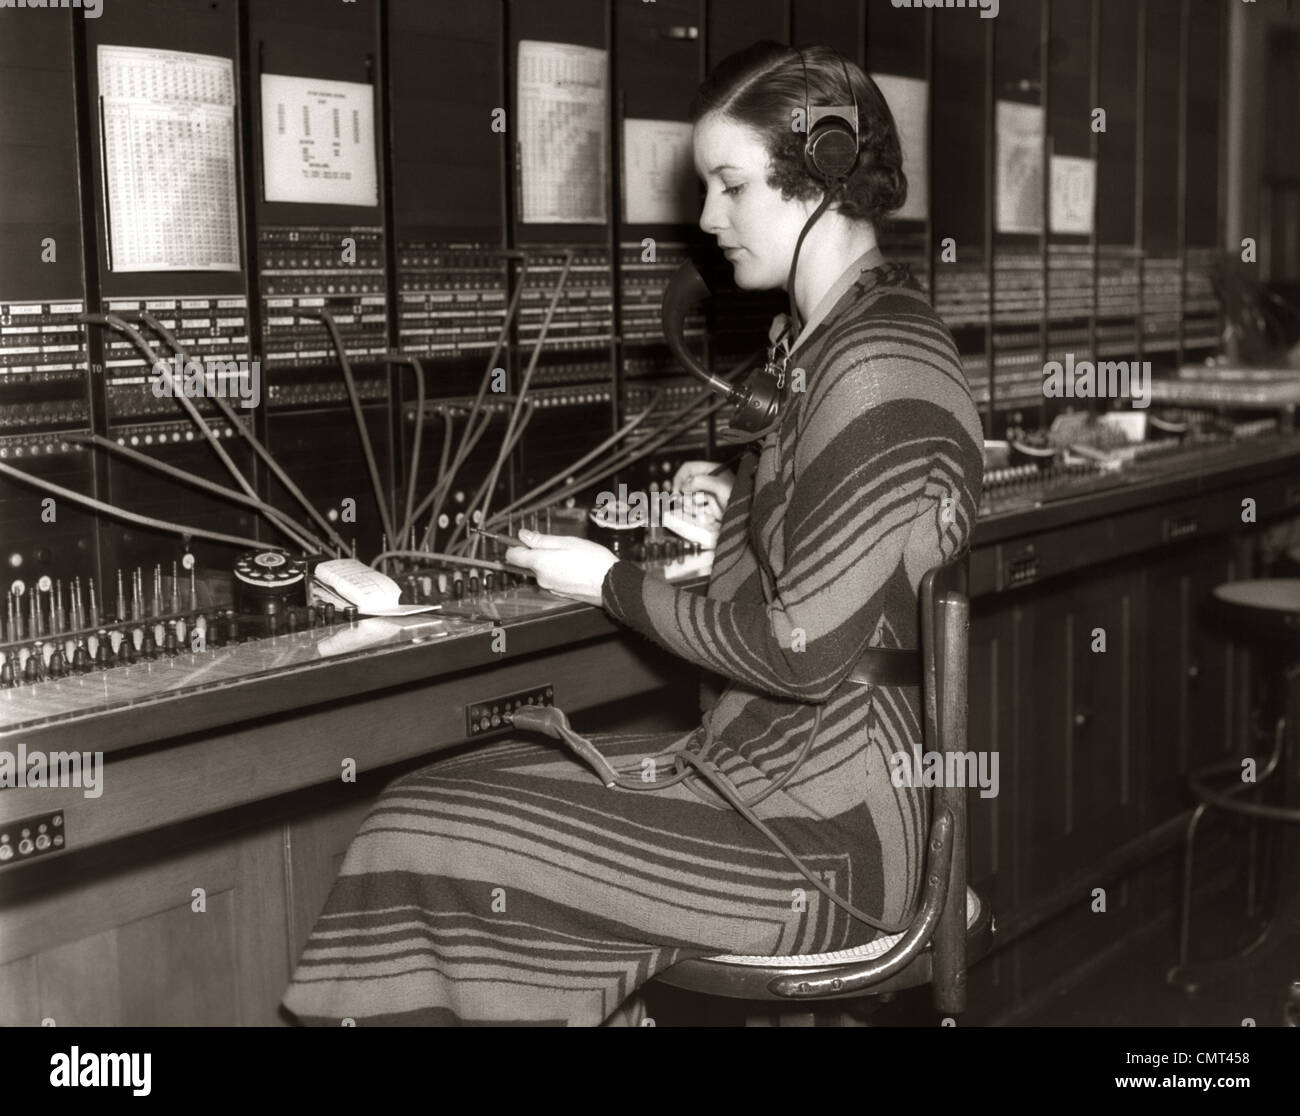 1930s WOMAN TELEPHONE OPERATOR SITTING AT LARGE MANUAL SWITCHBOARD DIRECTING CALLS Stock Photo - Alamy